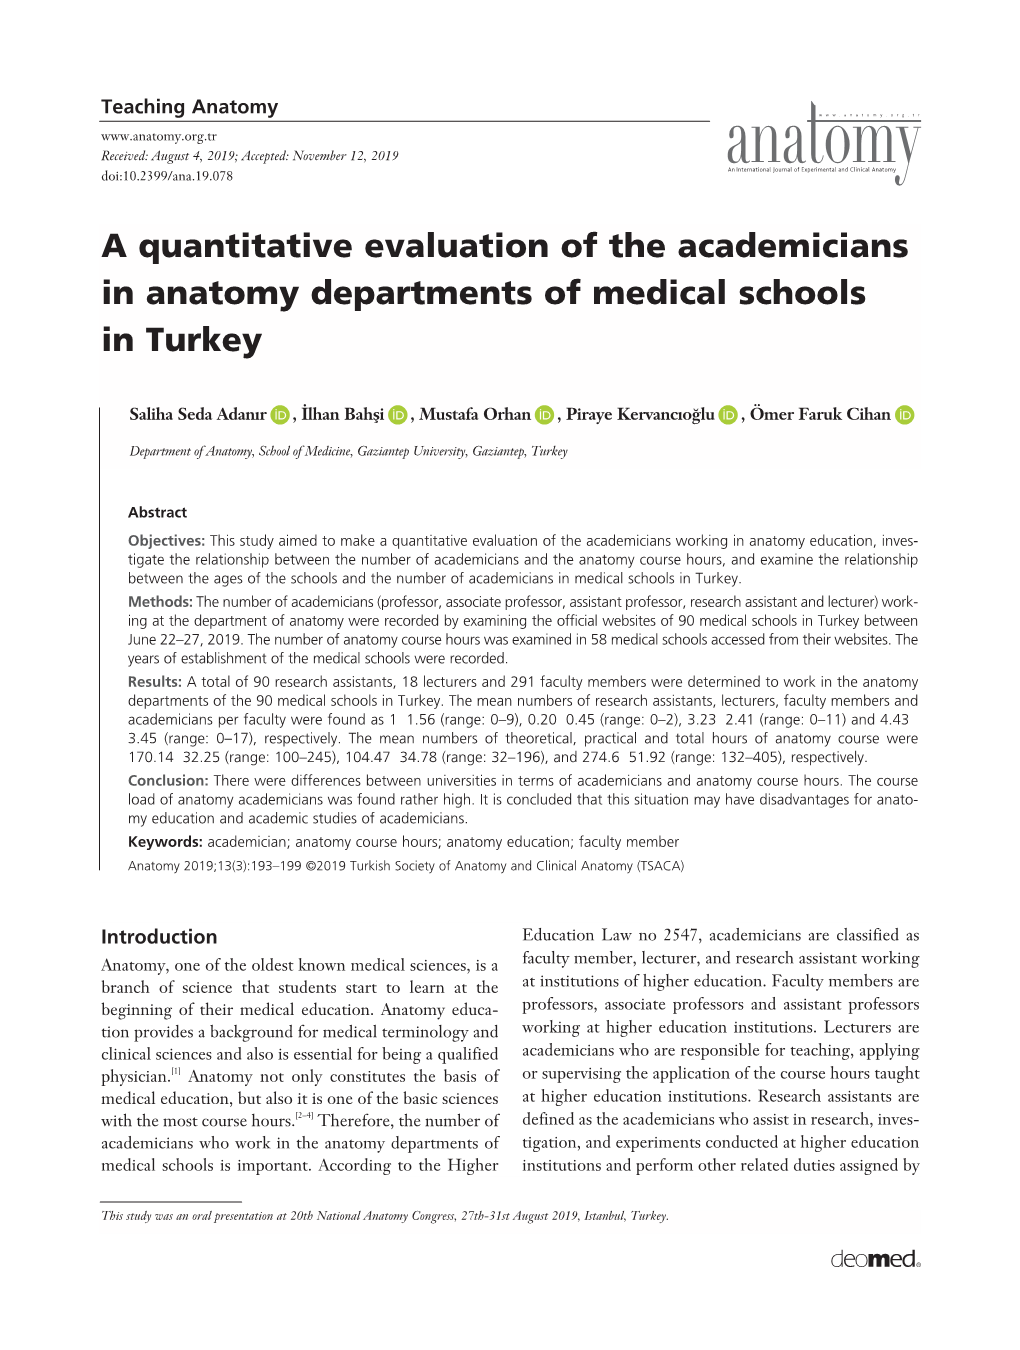 A Quantitative Evaluation of the Academicians in Anatomy Departments of Medical Schools in Turkey